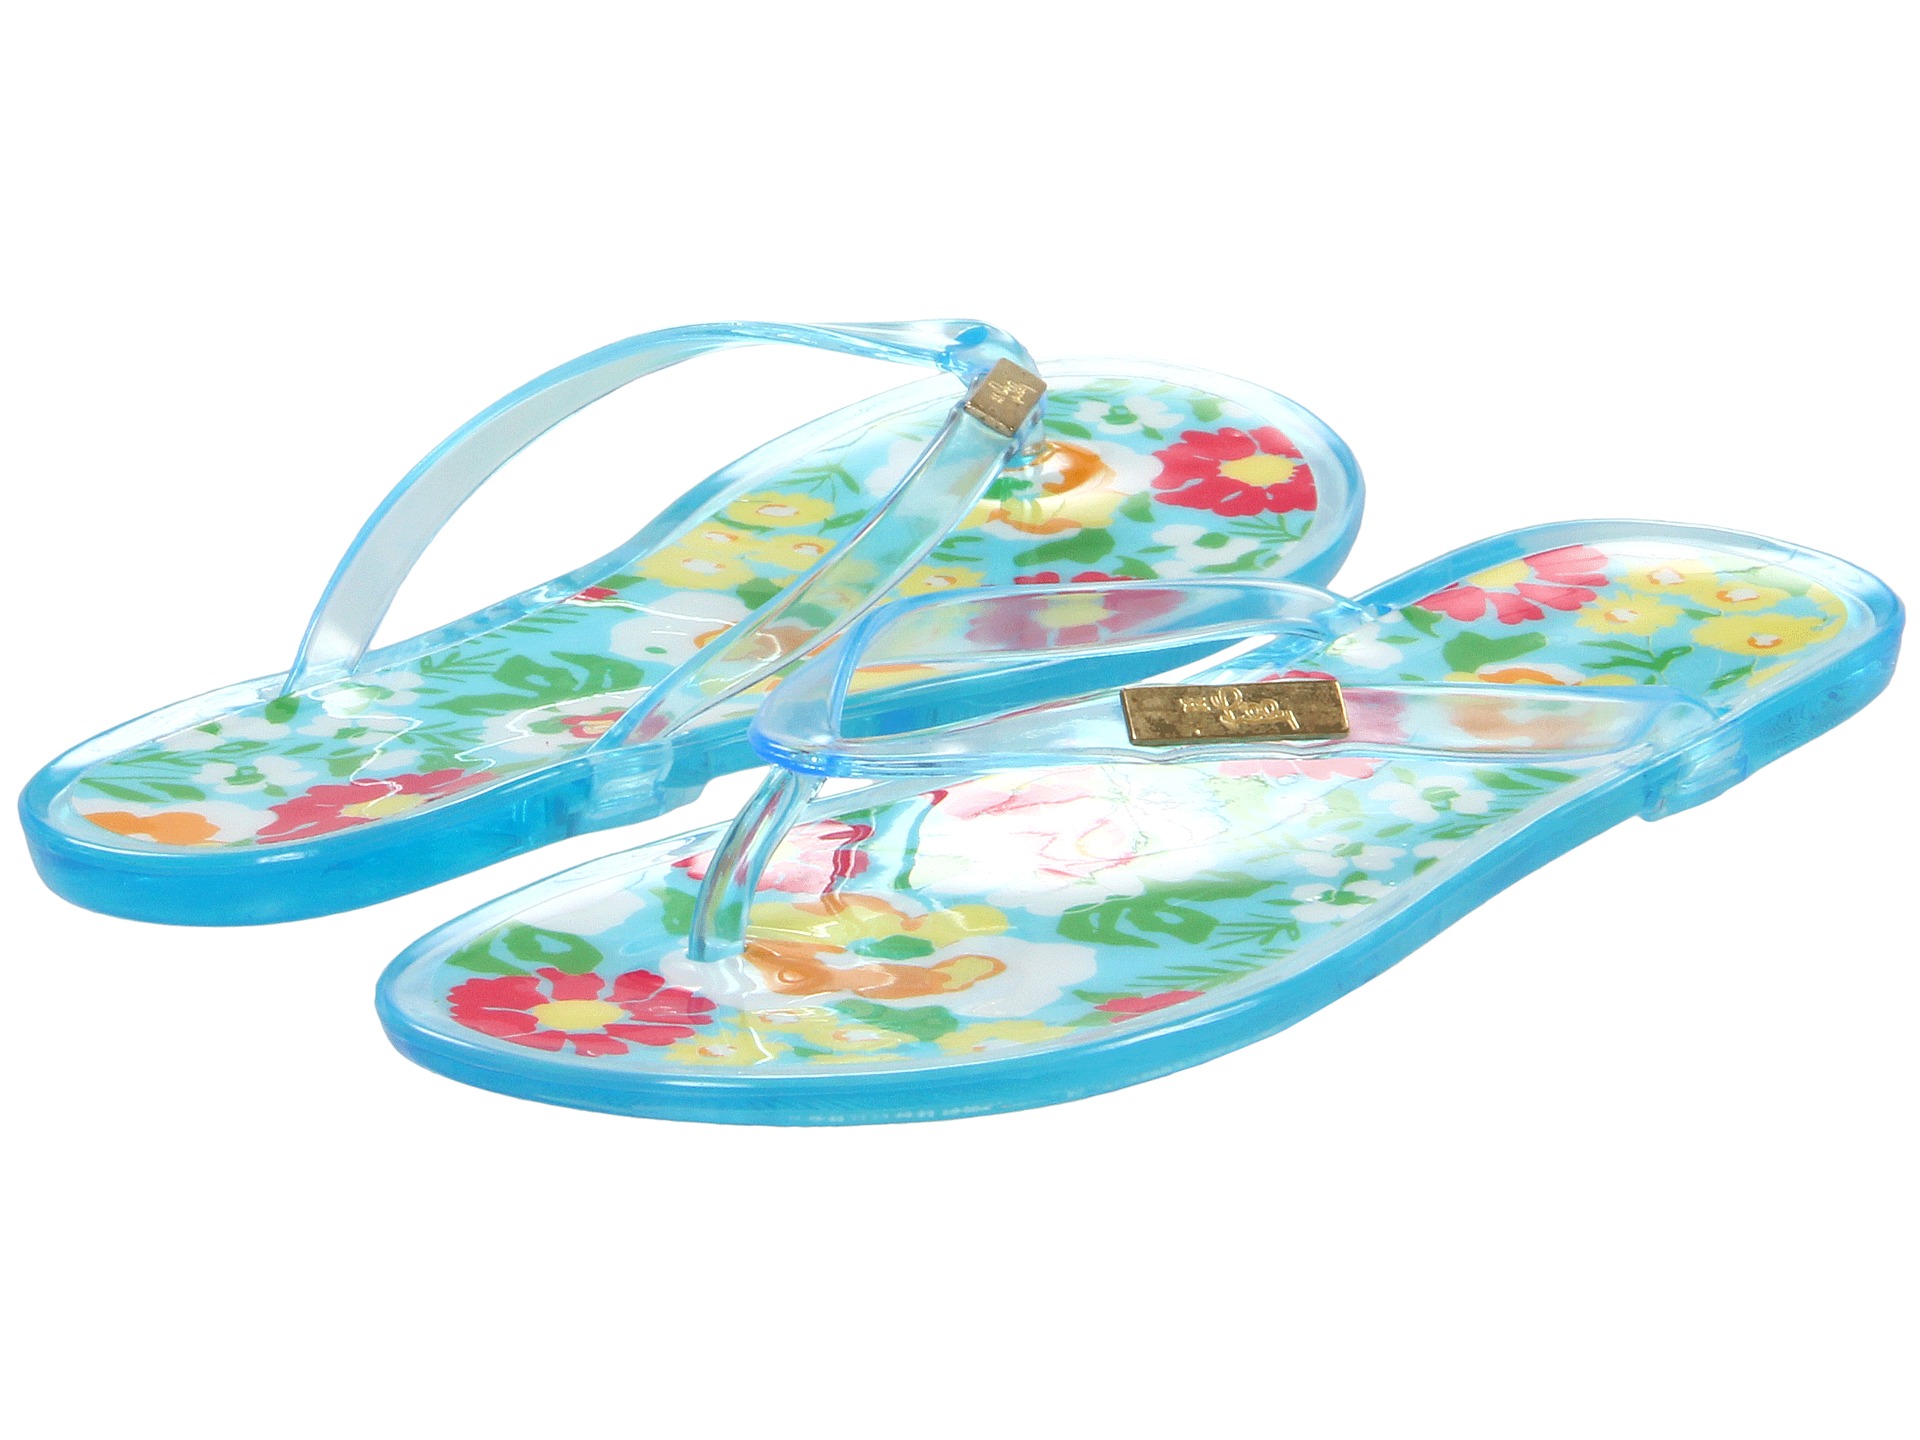 Lilly Pulitzer Shelly Jelly $21.99 ( 42% off MSRP $38.00)